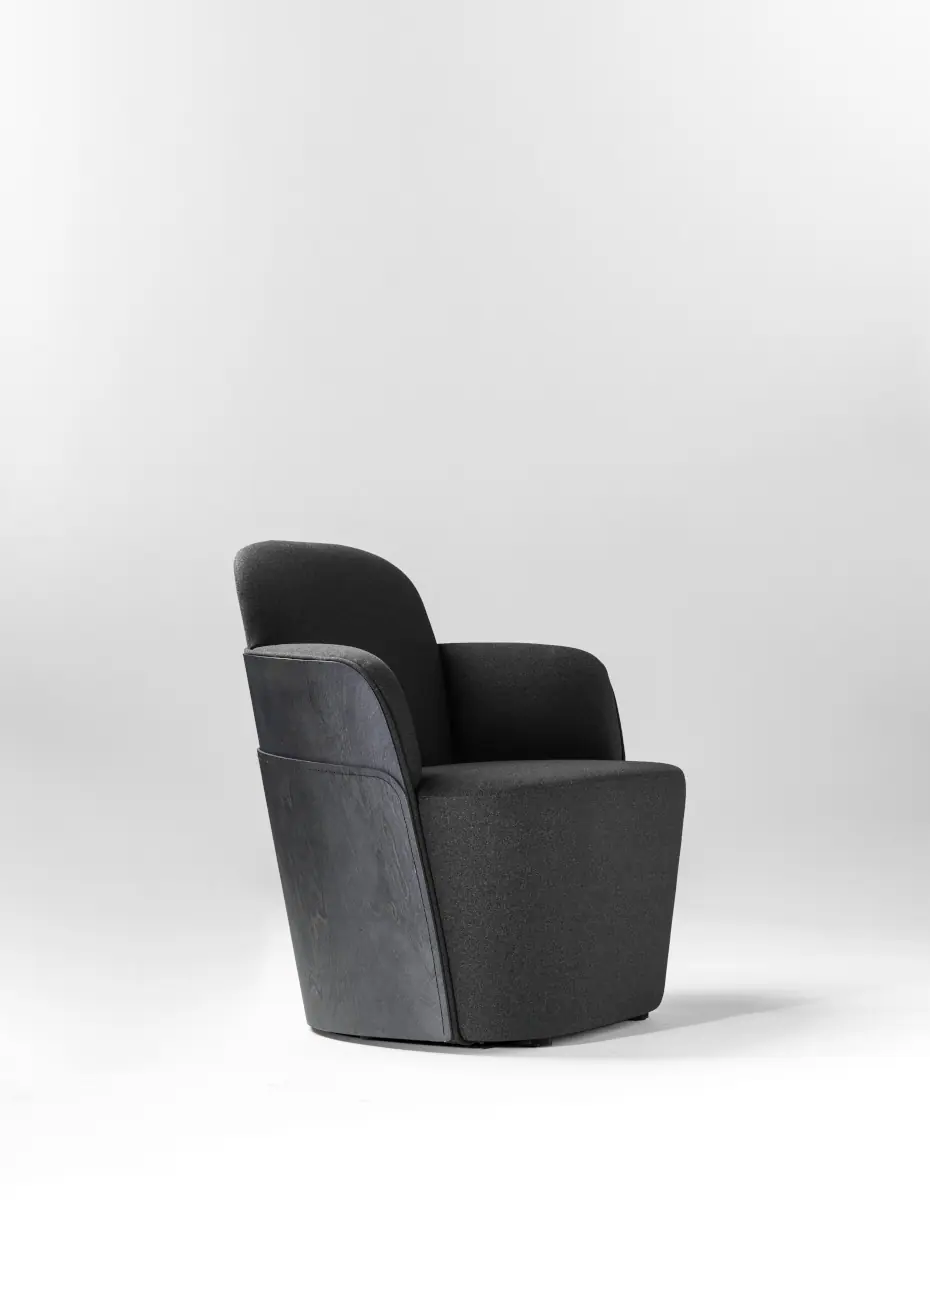 65814-65813-little-couture-armchair